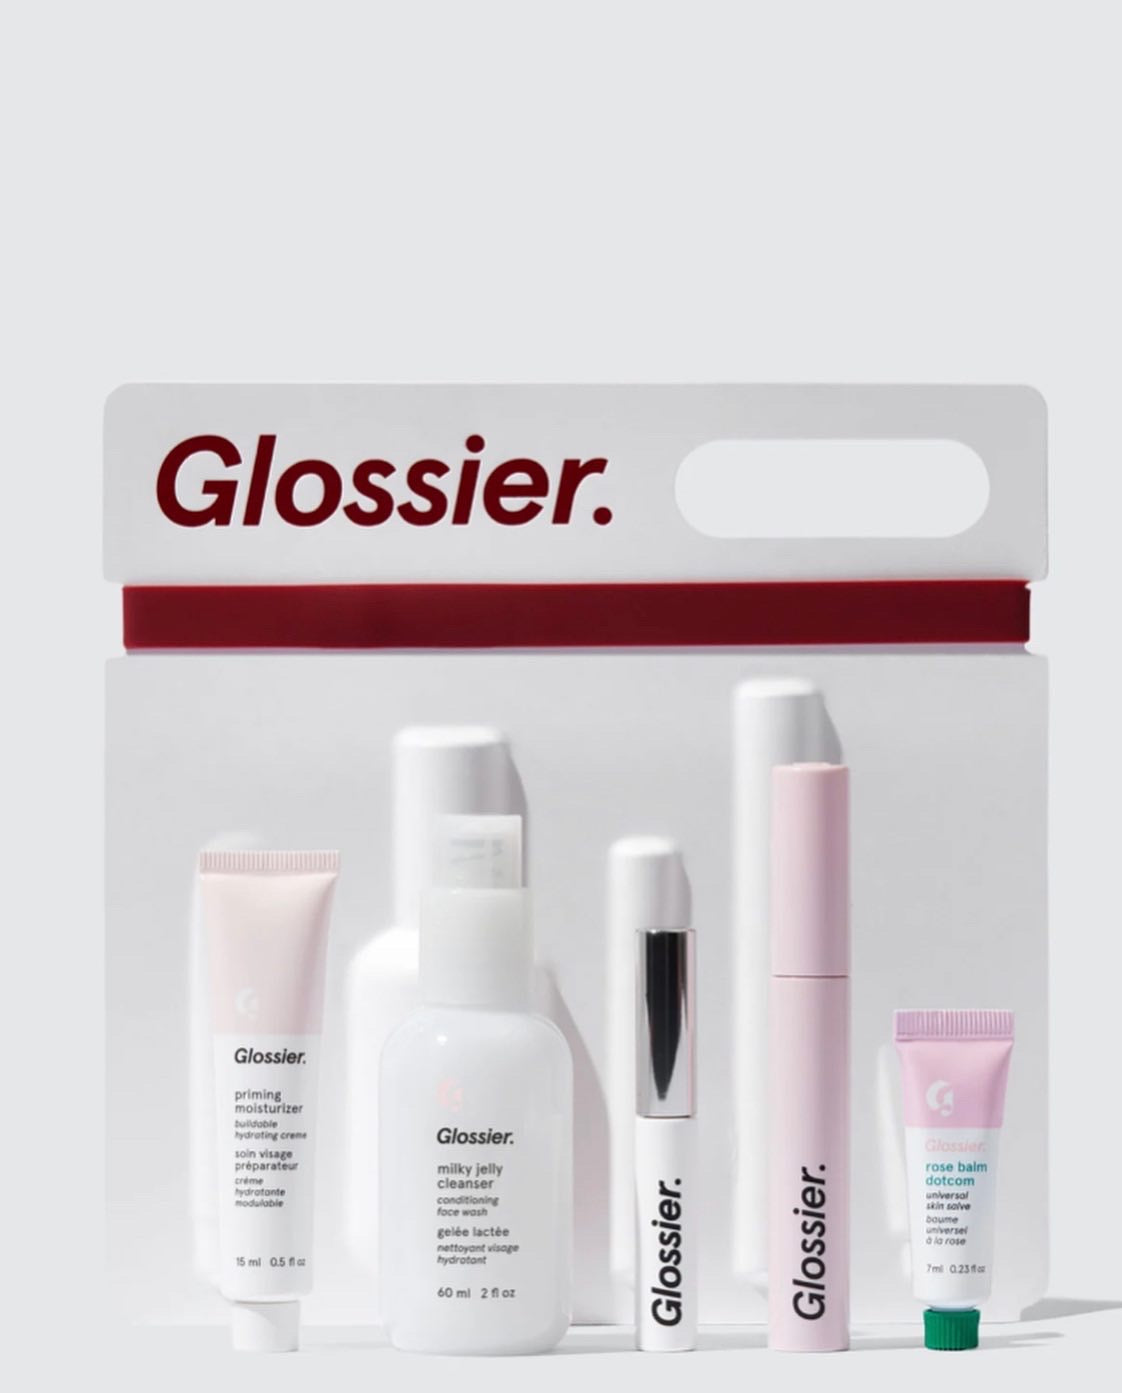 GLOSSIER, THE ESSENTIALS EDIT